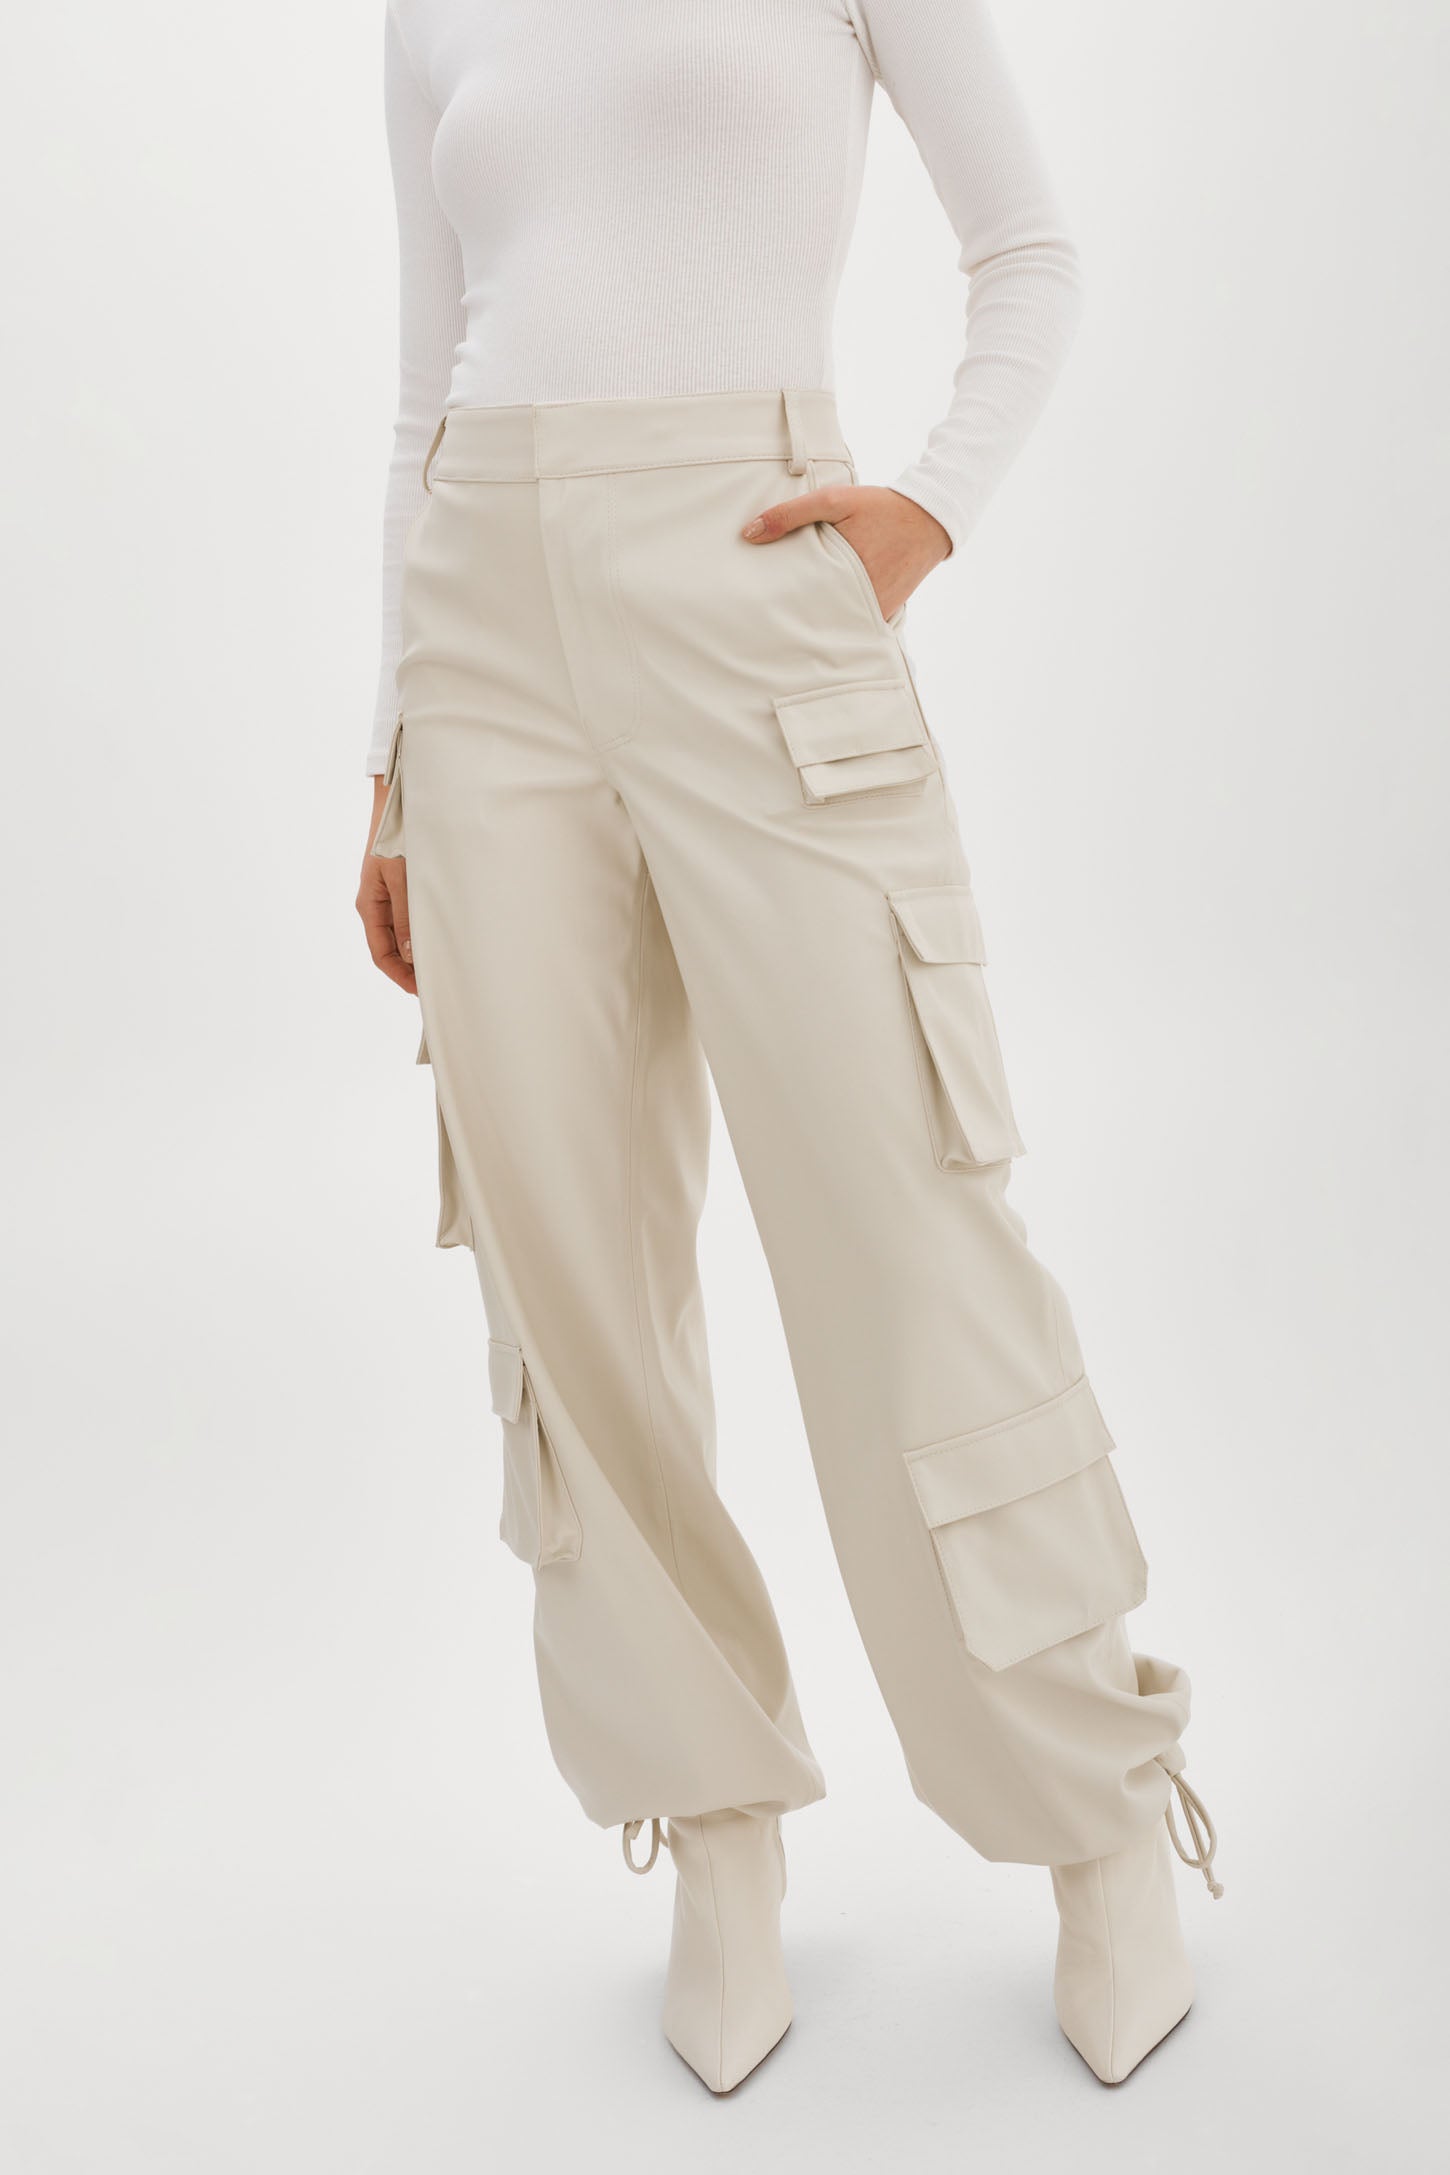 Marni Leather Wide Cargo Pants